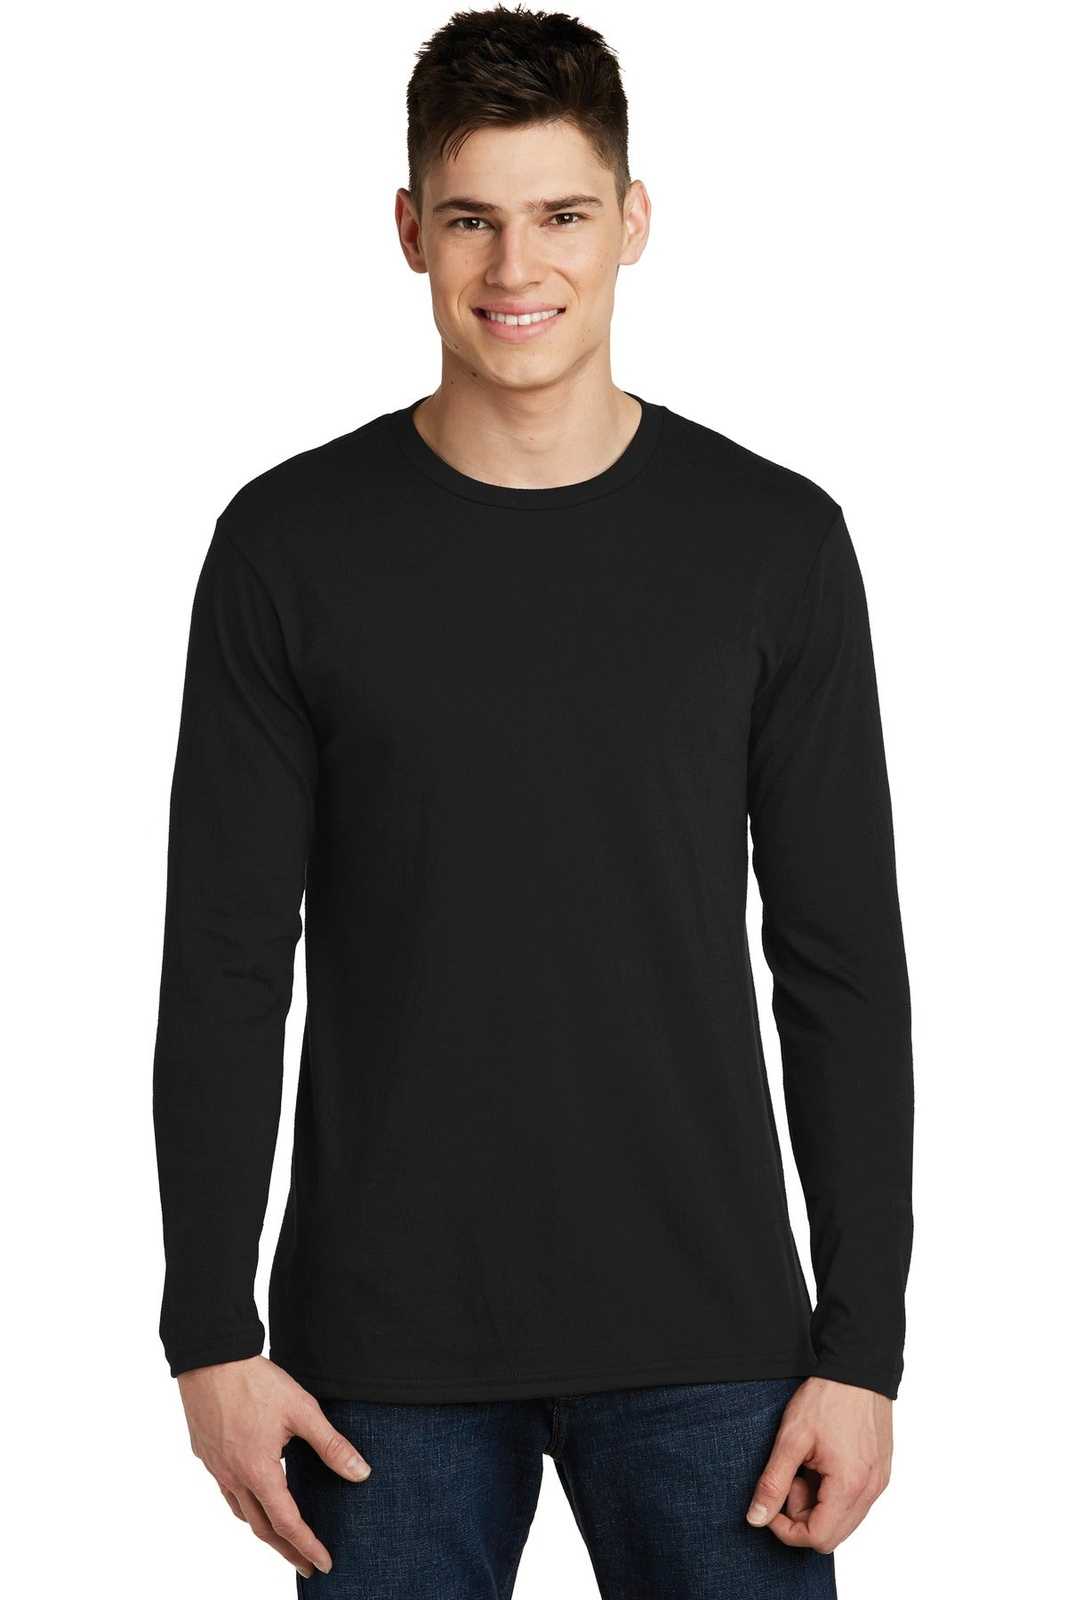 District DT6200 Very Important Tee Long Sleeve - Black - HIT a Double - 1